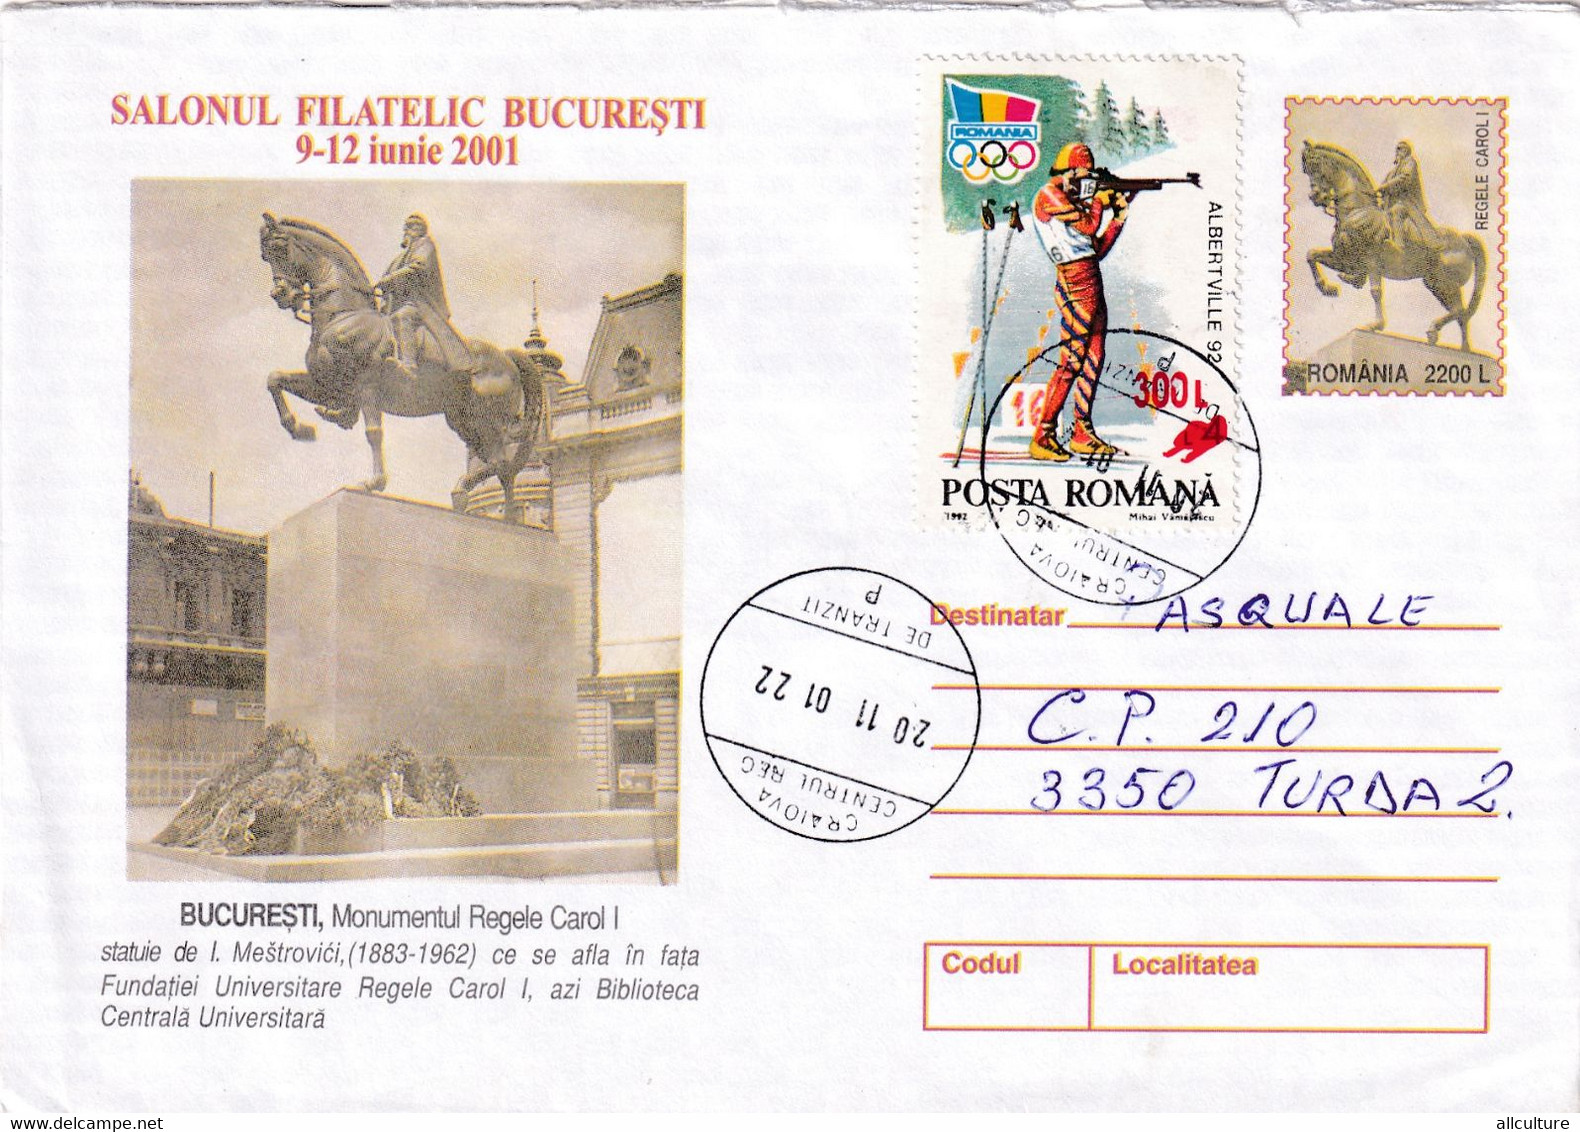 A9745- KING CAROL I MONUMENT BUCHAREST, USED STAMP ON COVER, CRAIOVA 2001 ROMANIA COVER STATIONERY - Monuments